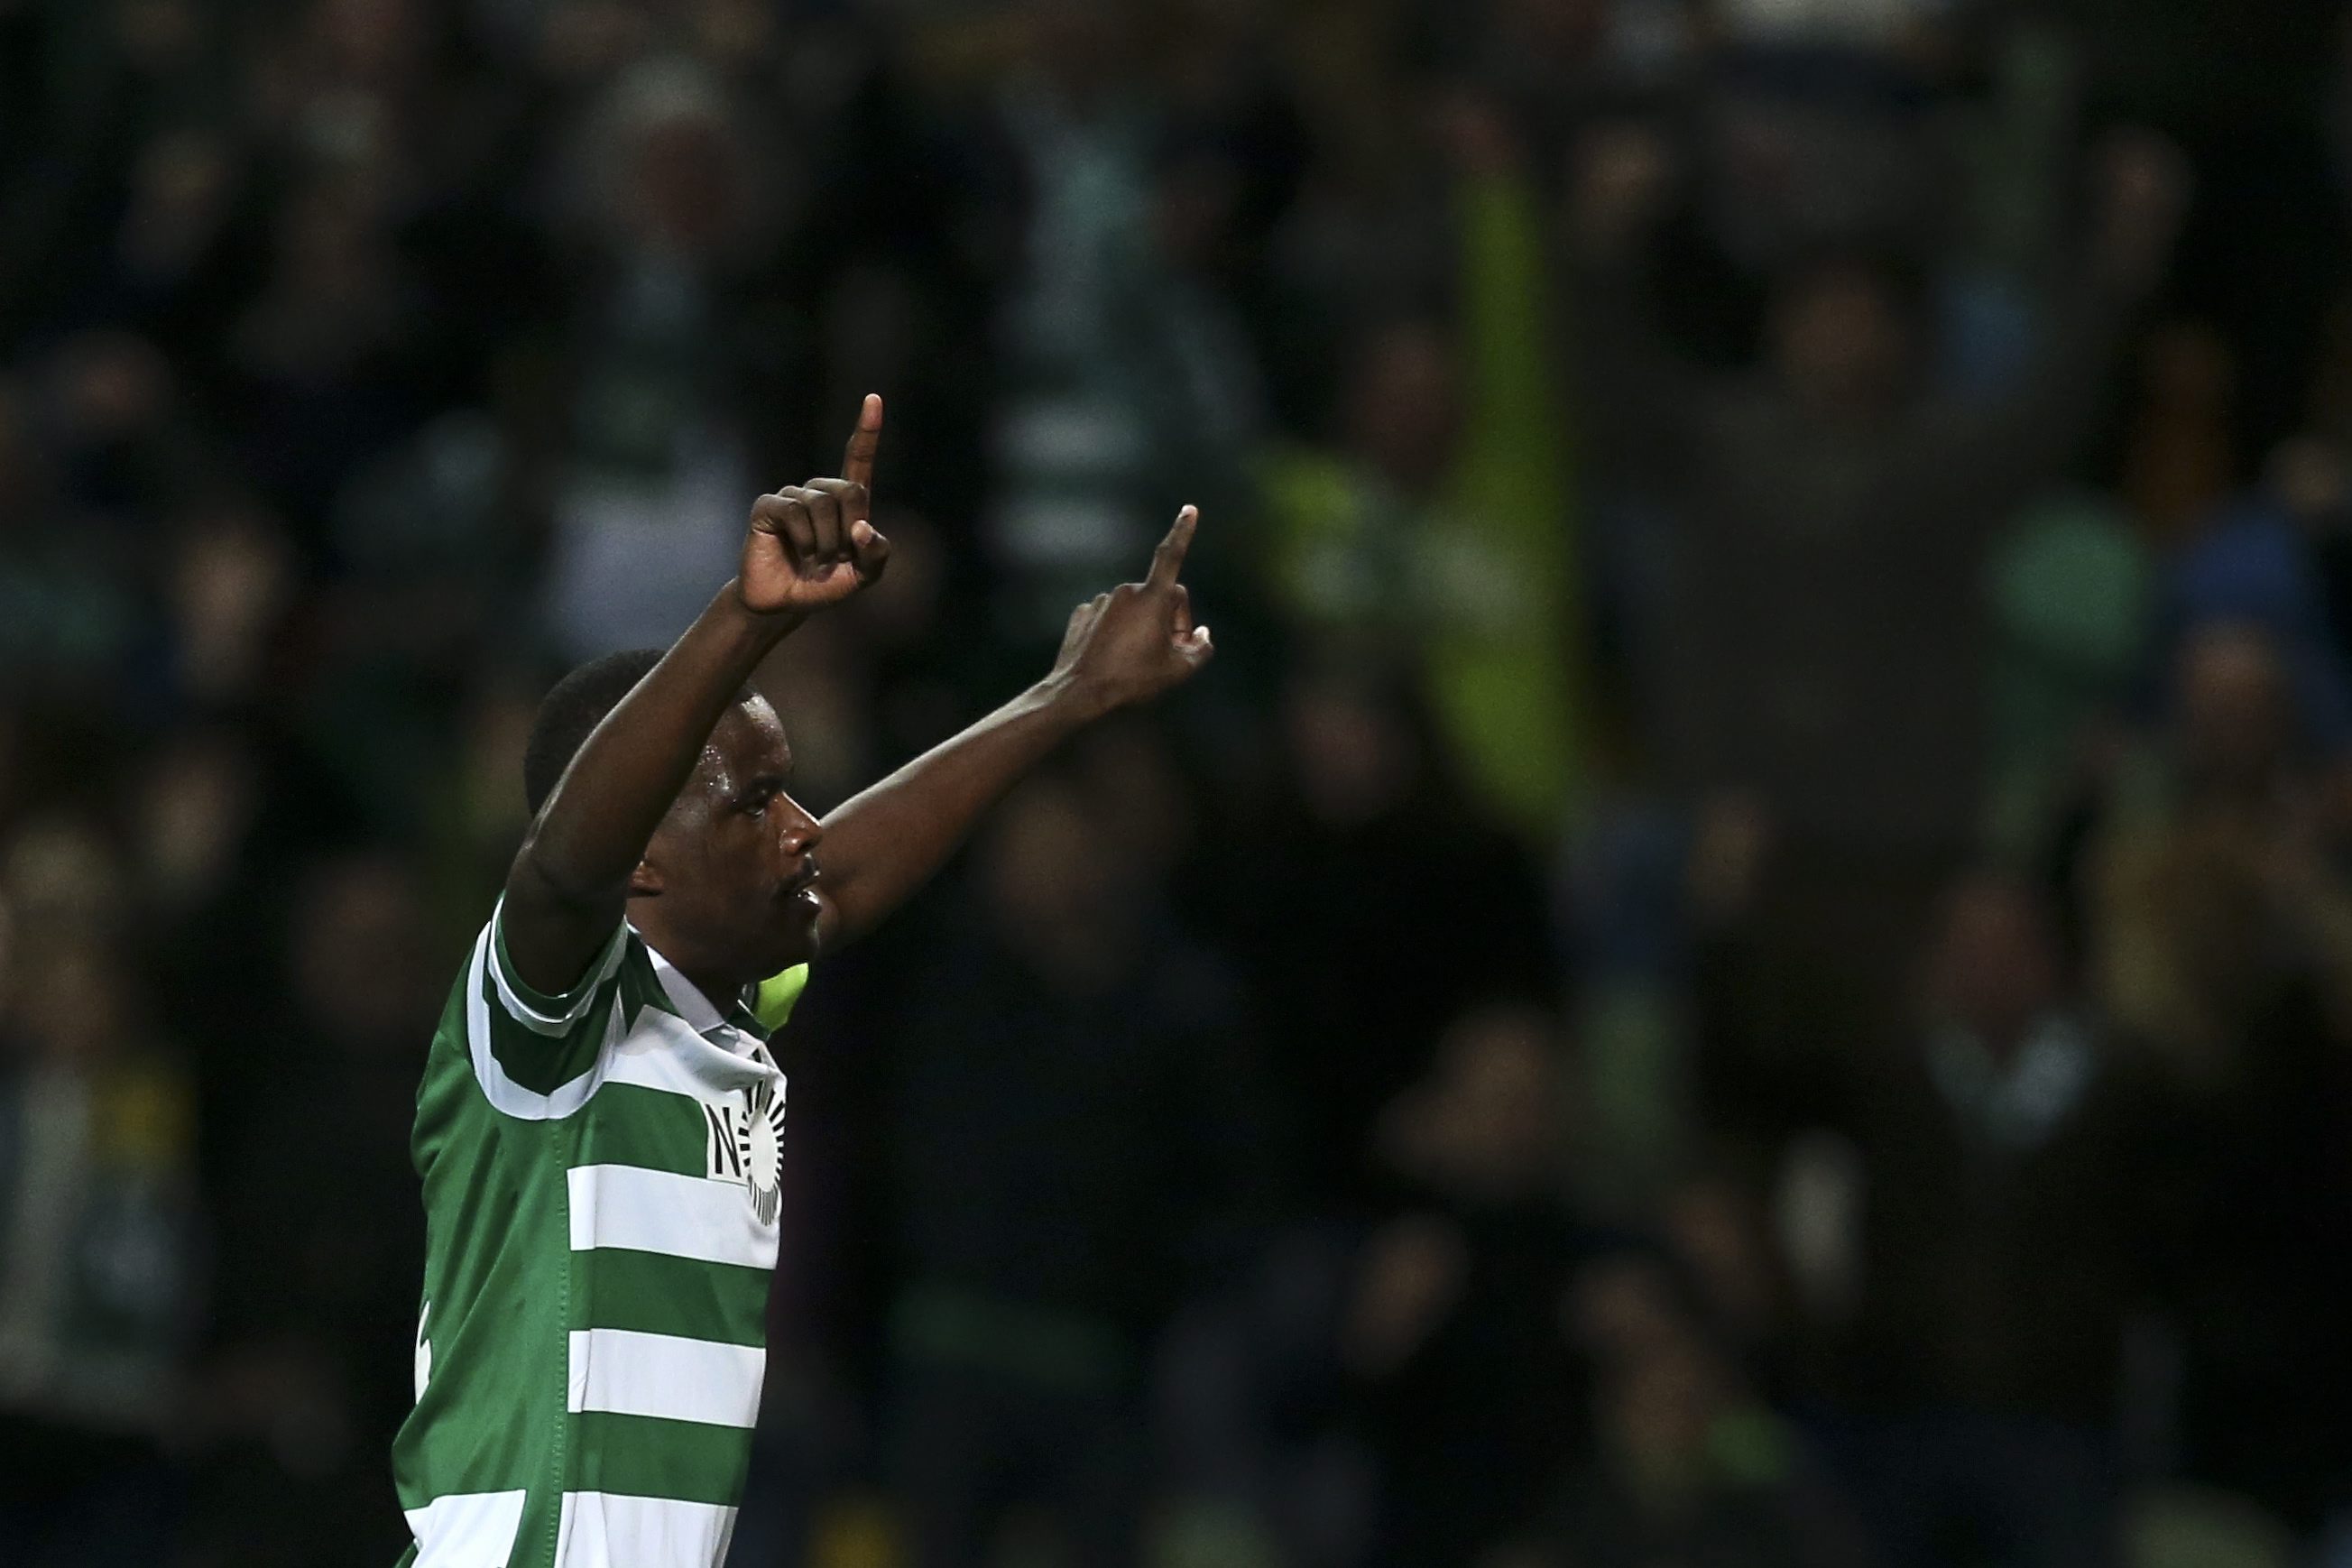 epa05251724 Sporting's William Carvalho celebrates after scoring the second goal against Maritimo during their Portuguese First League soccer match held at Alvalade Stadium, in Lisbon, Portugal, 09 April 2016.  EPA/MANUEL DE ALMEIDA